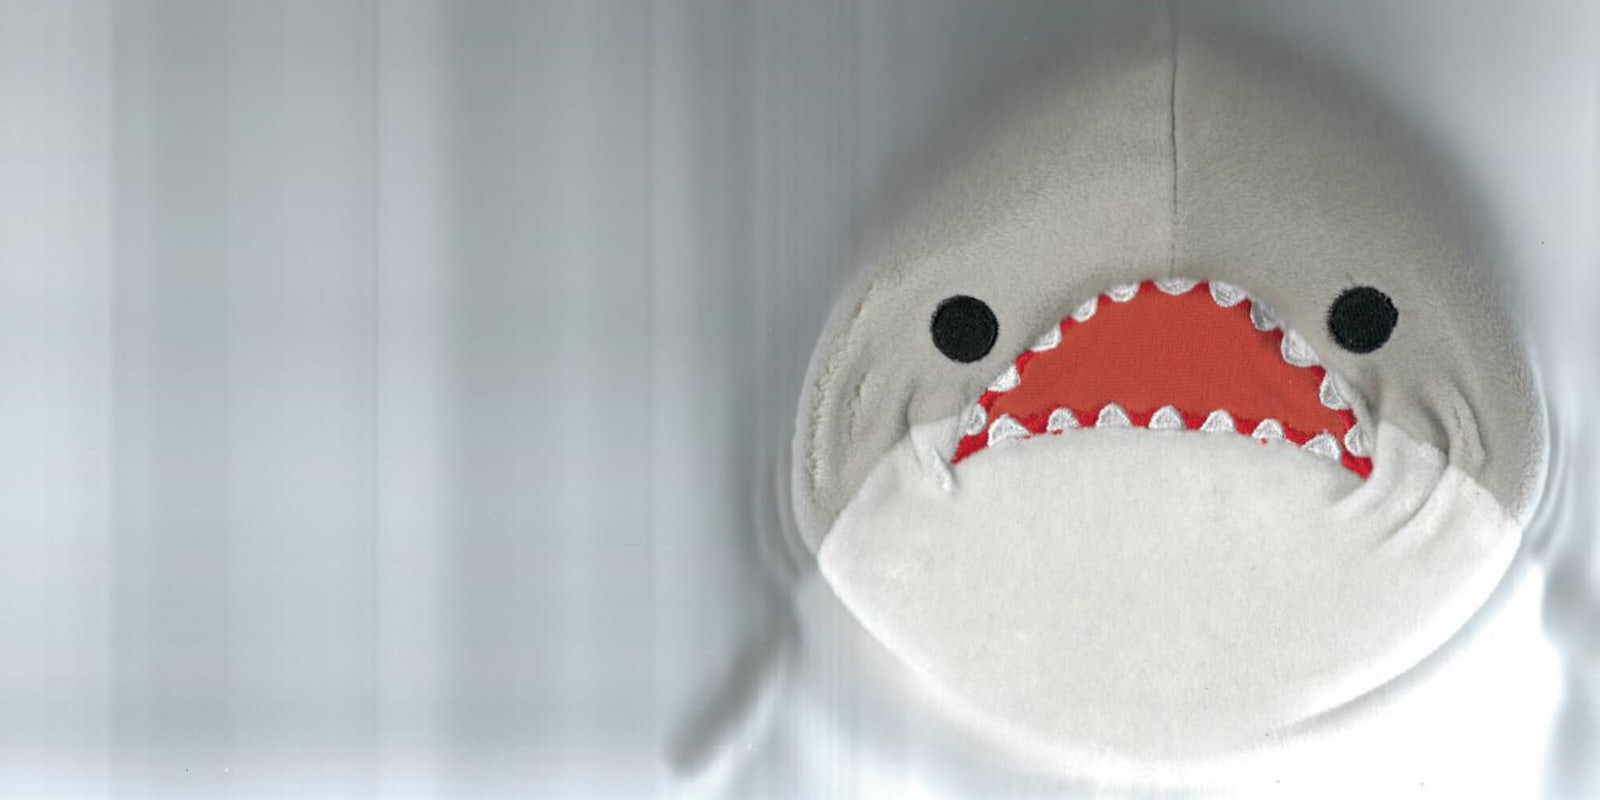 One Twitter user went viral for scanning a stuffed shark in an office scanner.